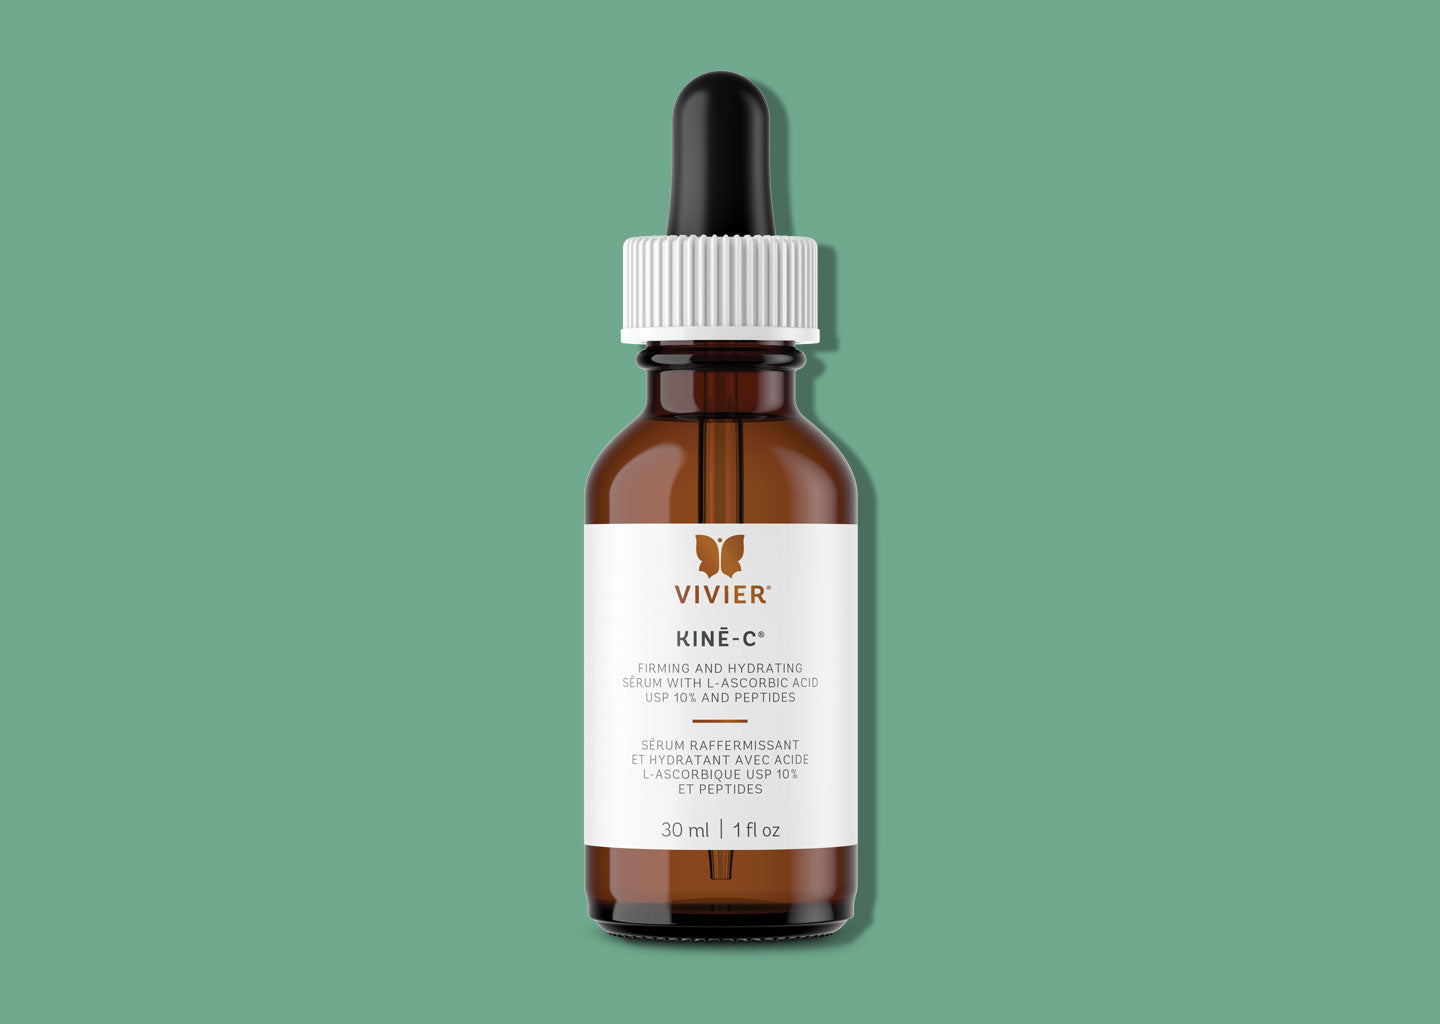 Vivier Kine-C Firming and Hydrating Serum